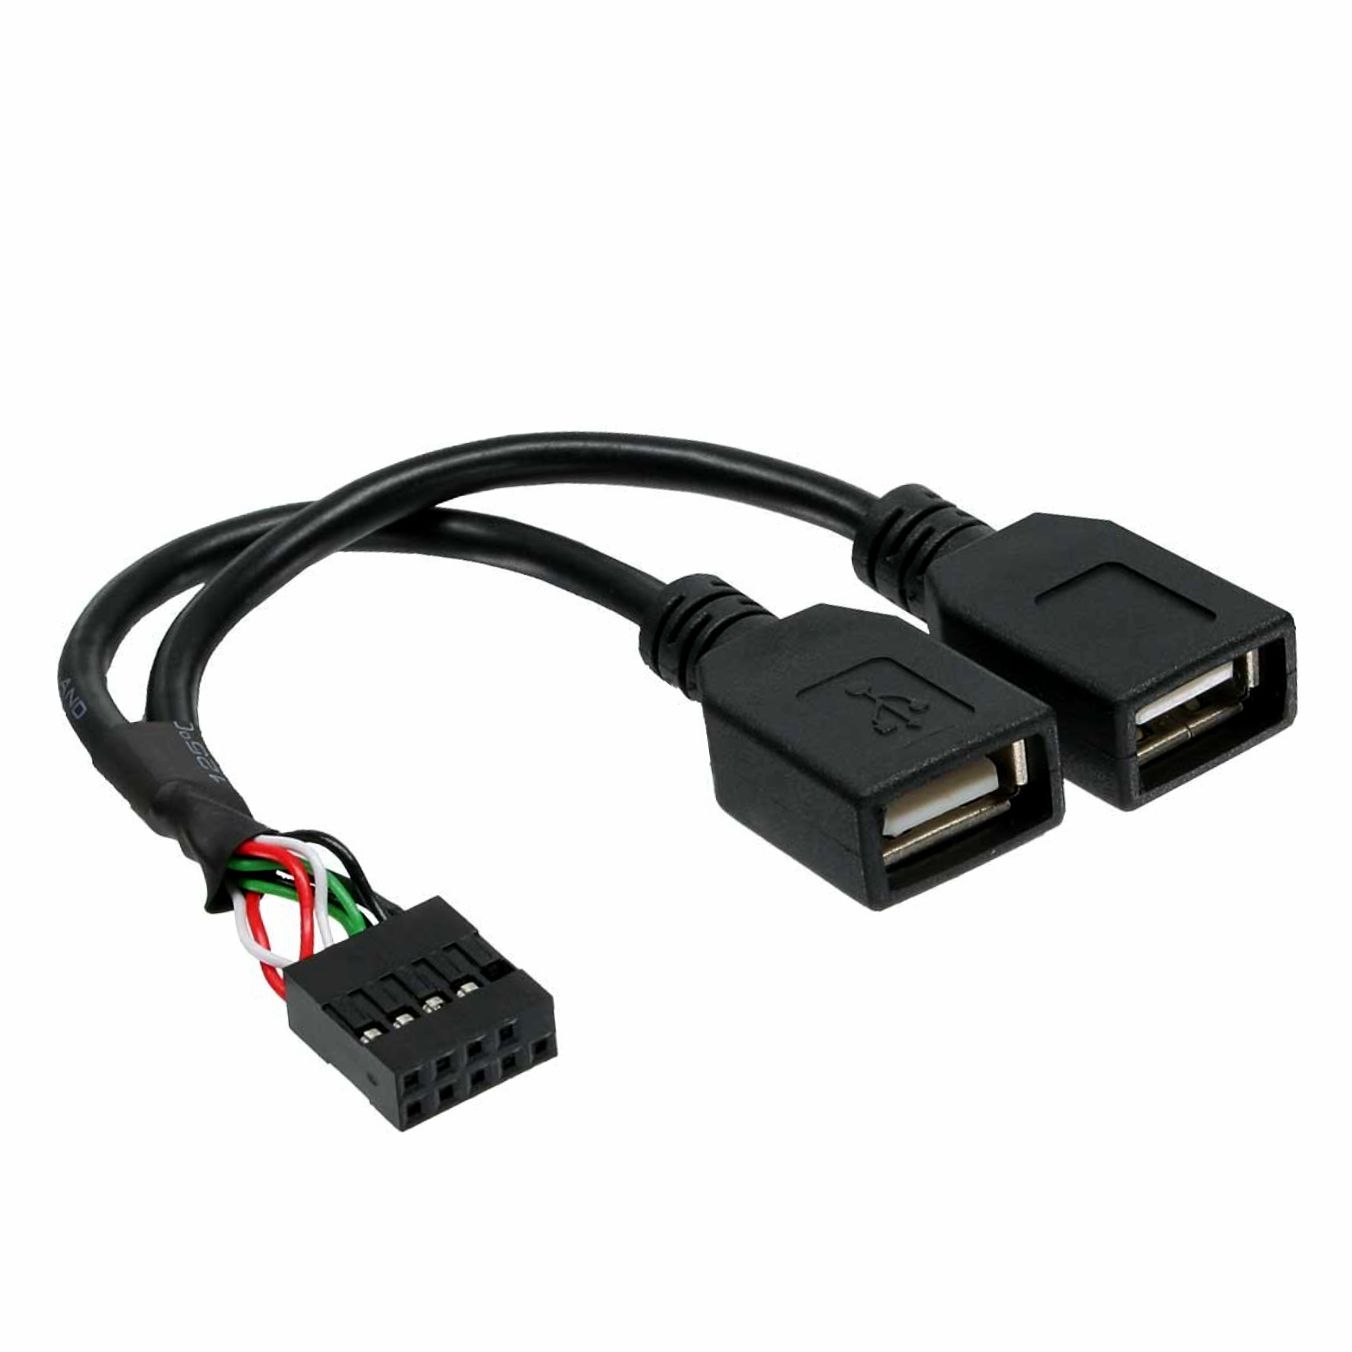 USB 2.0 adapter cable 2x A female to pin header 10cont, about 15cm